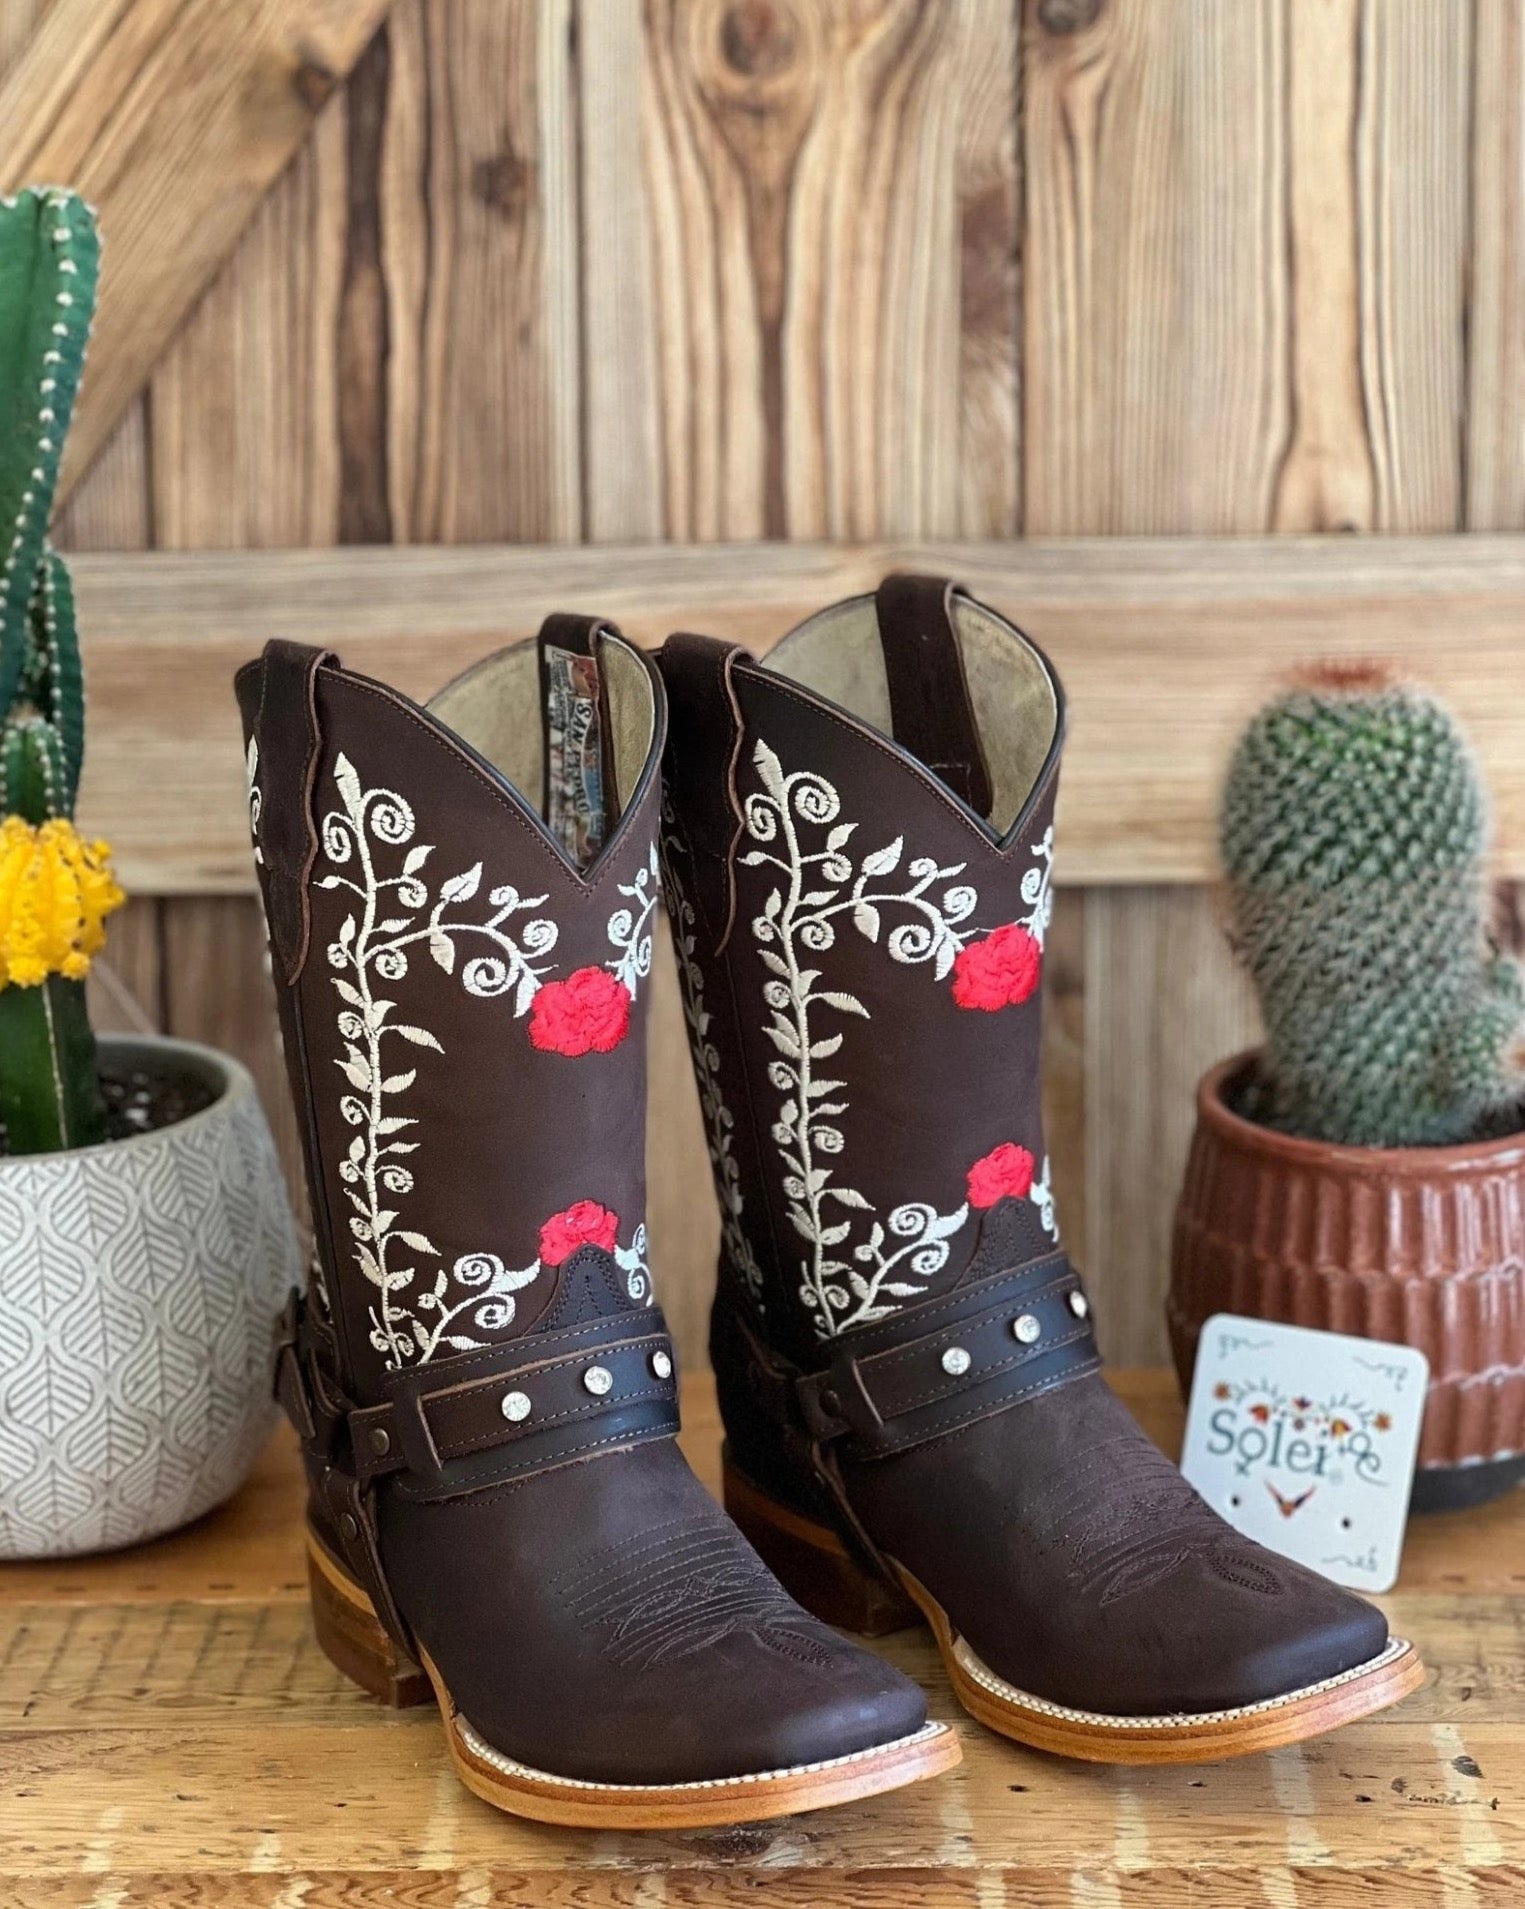 Artisanal Mexican Leather Floral Embroidered Boots. Julia Boots - Solei Store